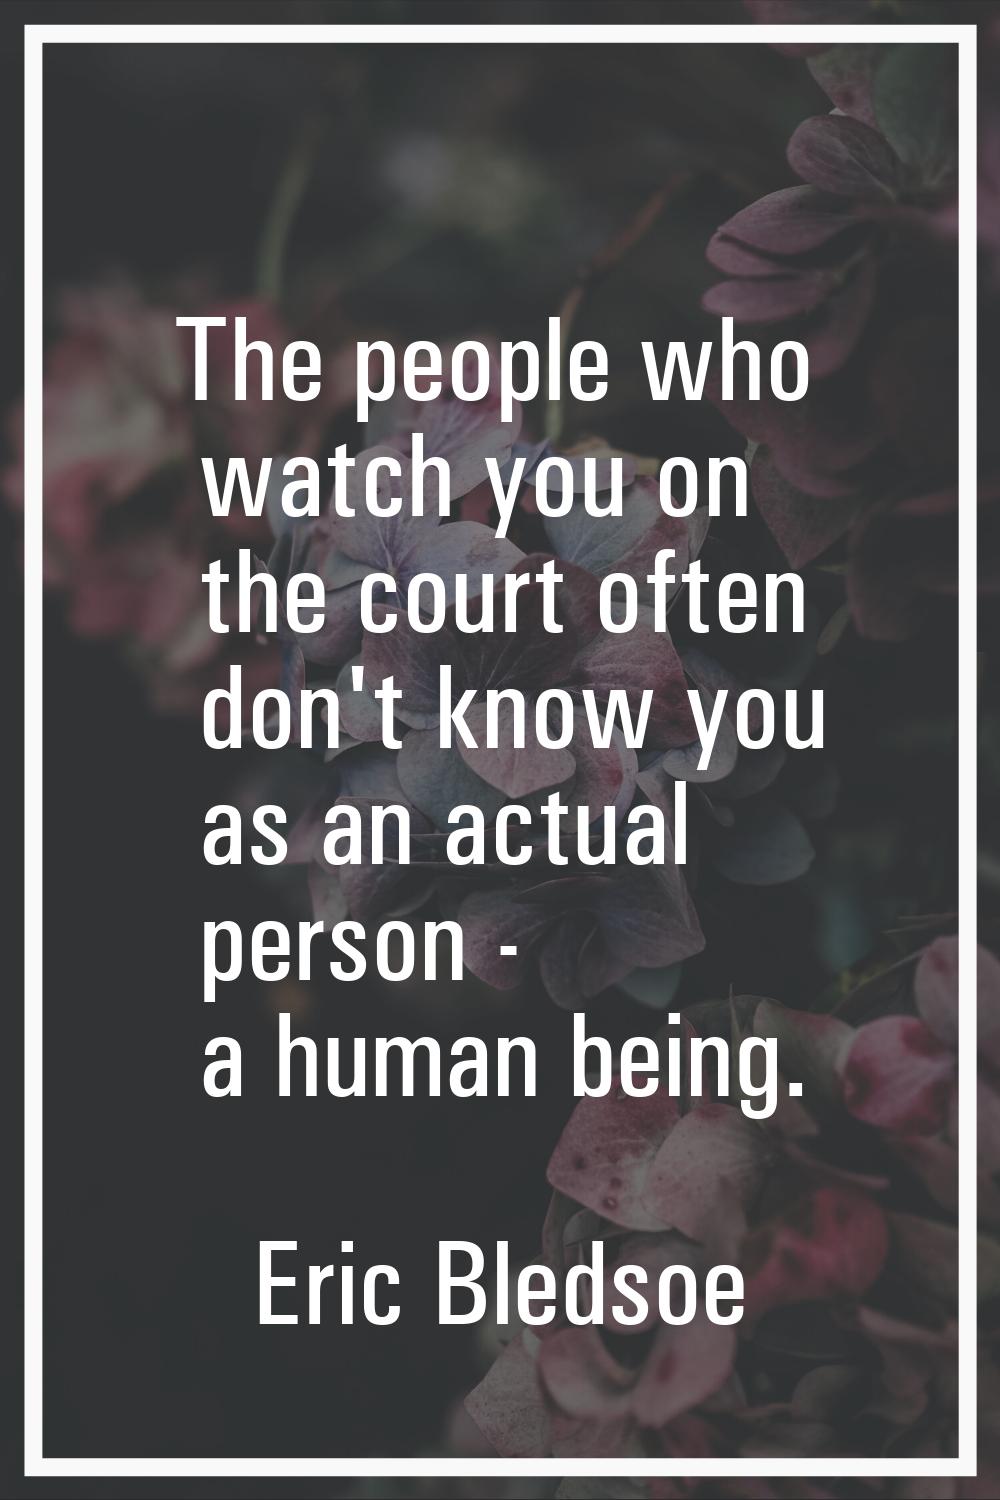 The people who watch you on the court often don't know you as an actual person - a human being.